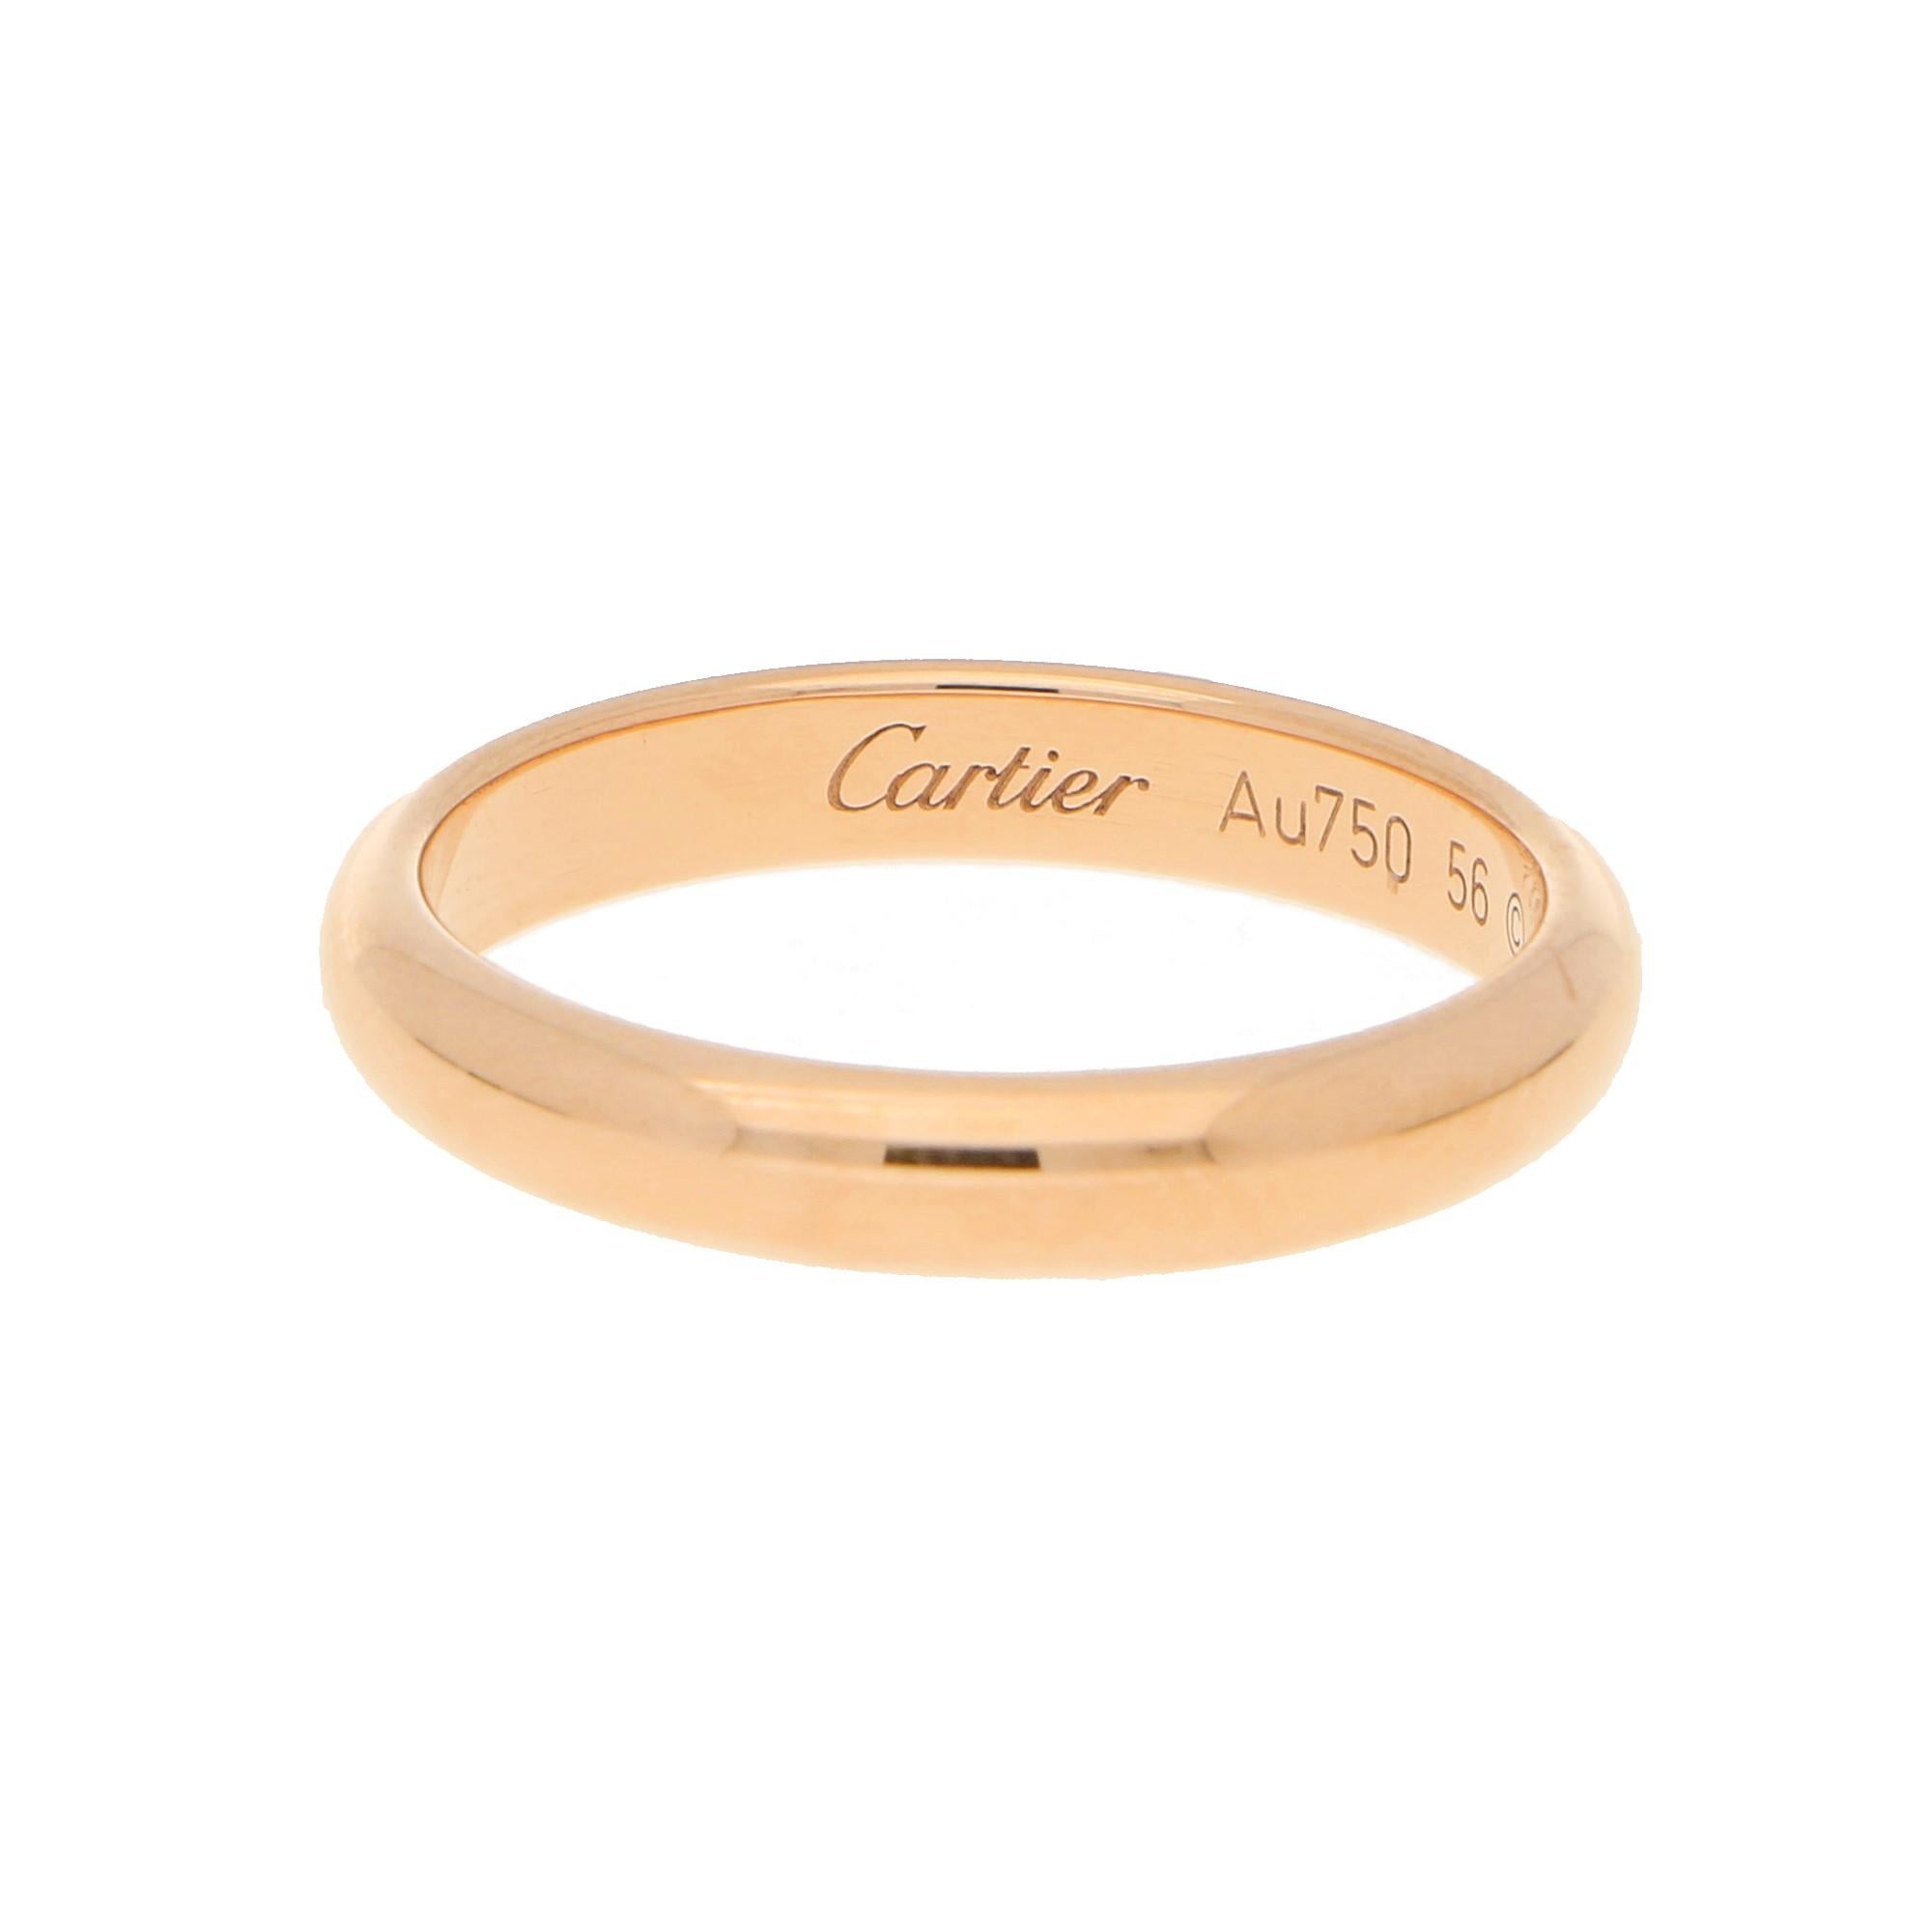 An elegant 18-karat yellow gold high-dome wedding ring, from Cartier's 1895 Collection. This ring is a finger size 8 but it could be sized to order. Dimensions: 3.5mm wide. Accompanied by Cartier's original box.